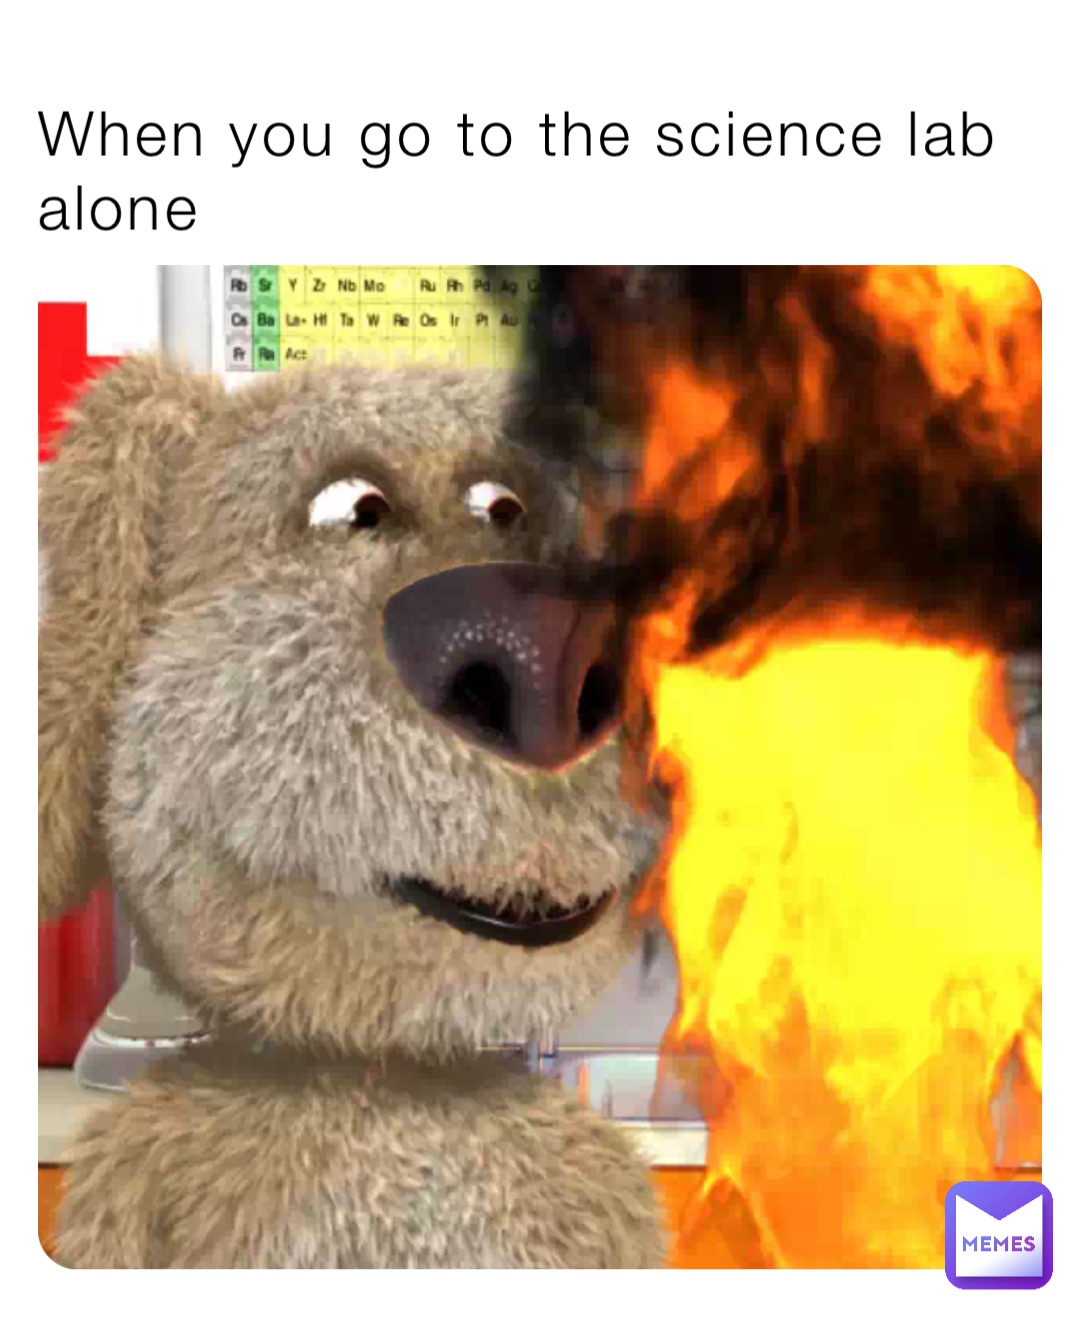 When you go to the science lab alone